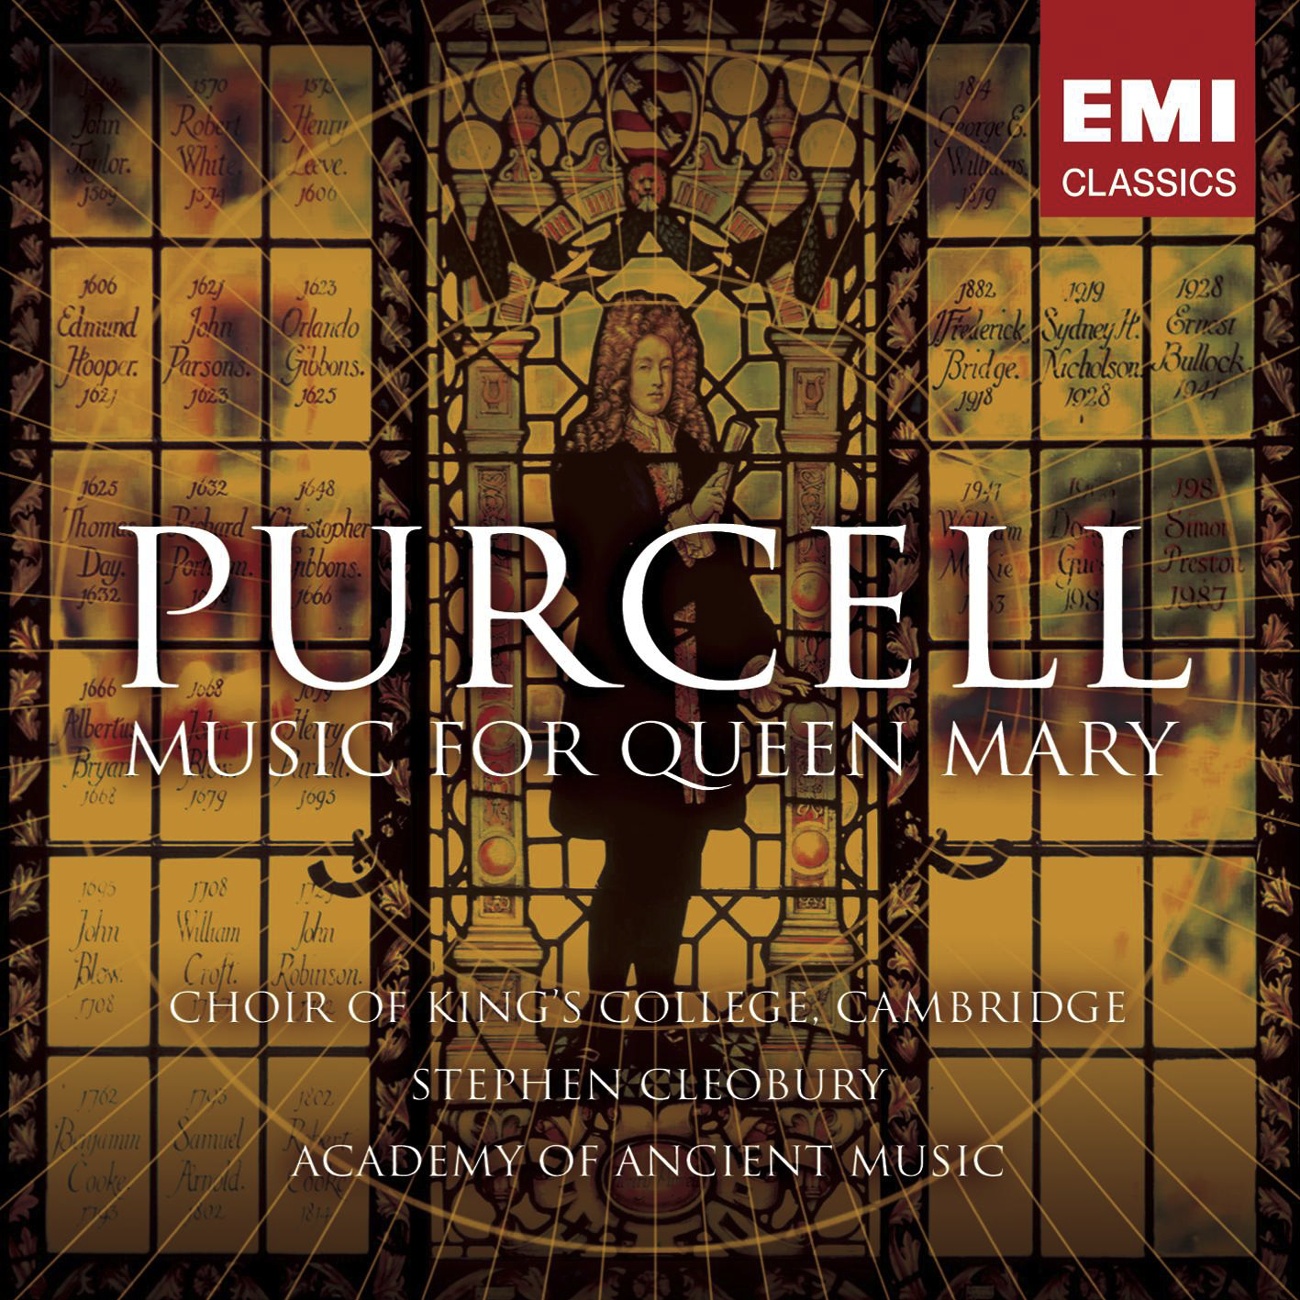 Music for the Funeral of Queen Mary 1695: Drum Recessional